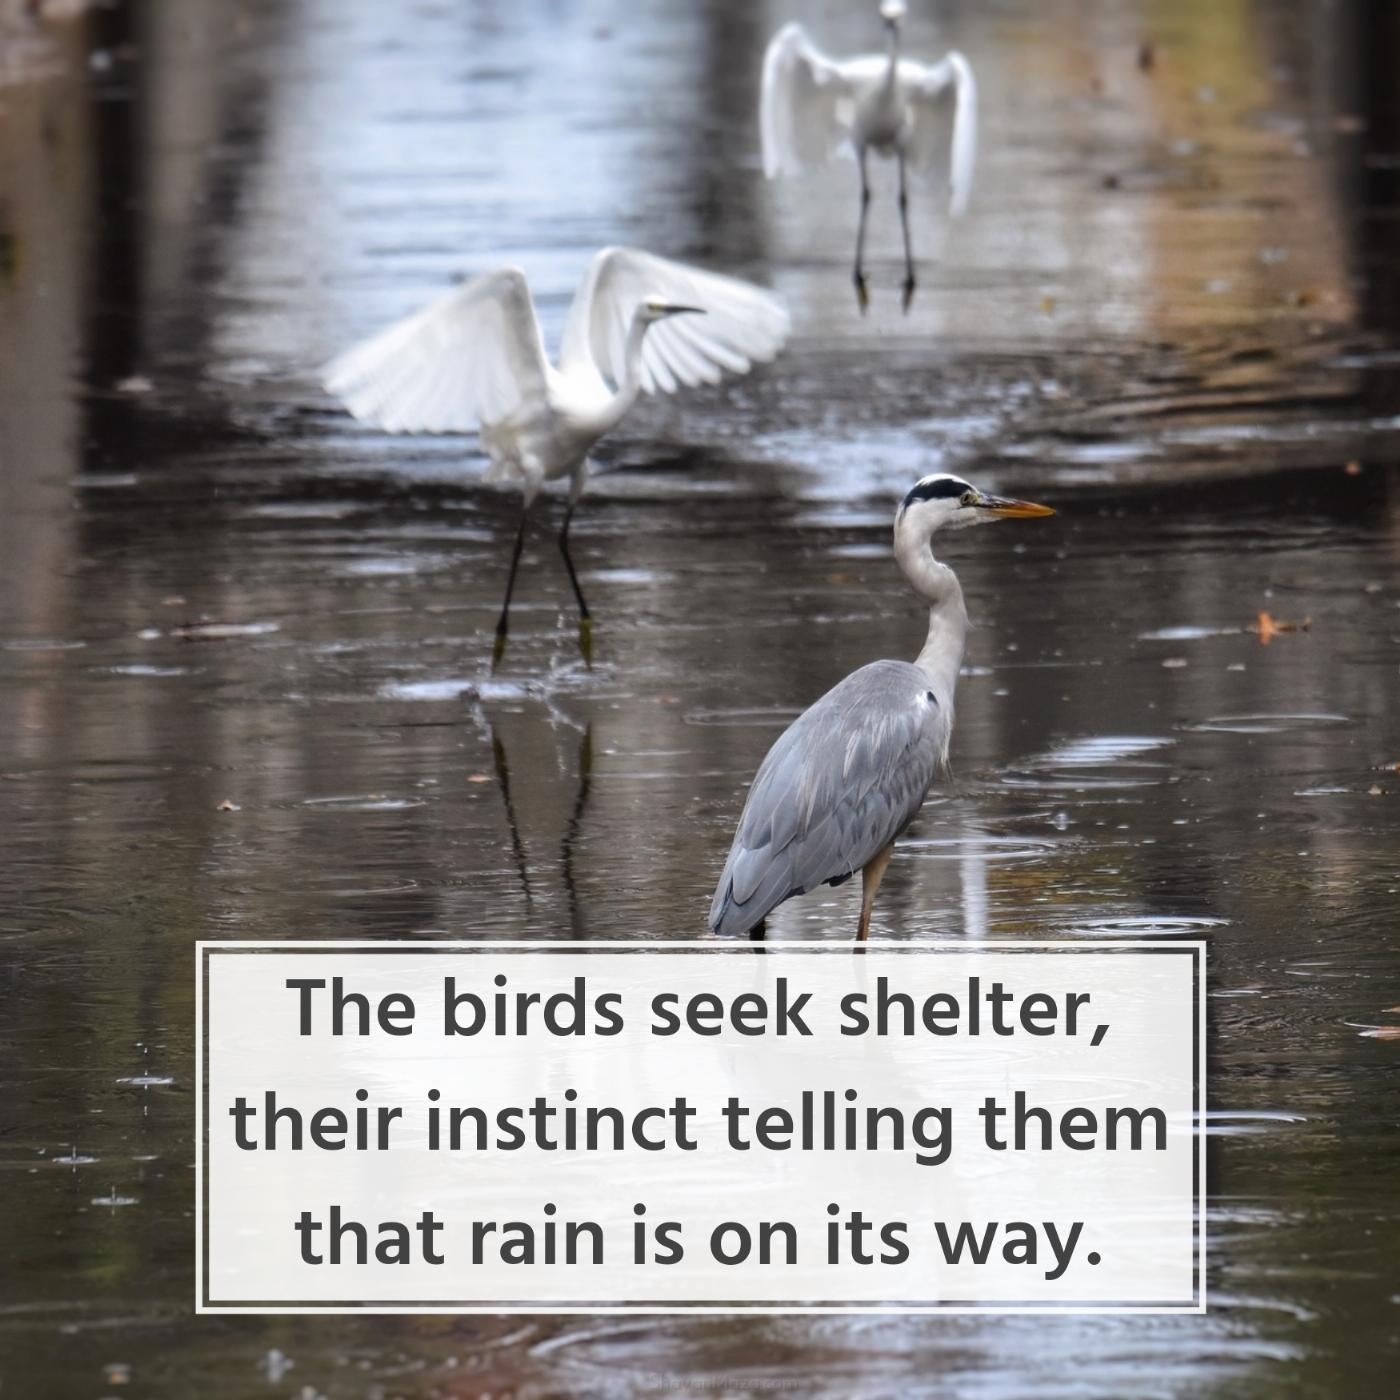 The birds seek shelter their instinct telling them that rain is on its way